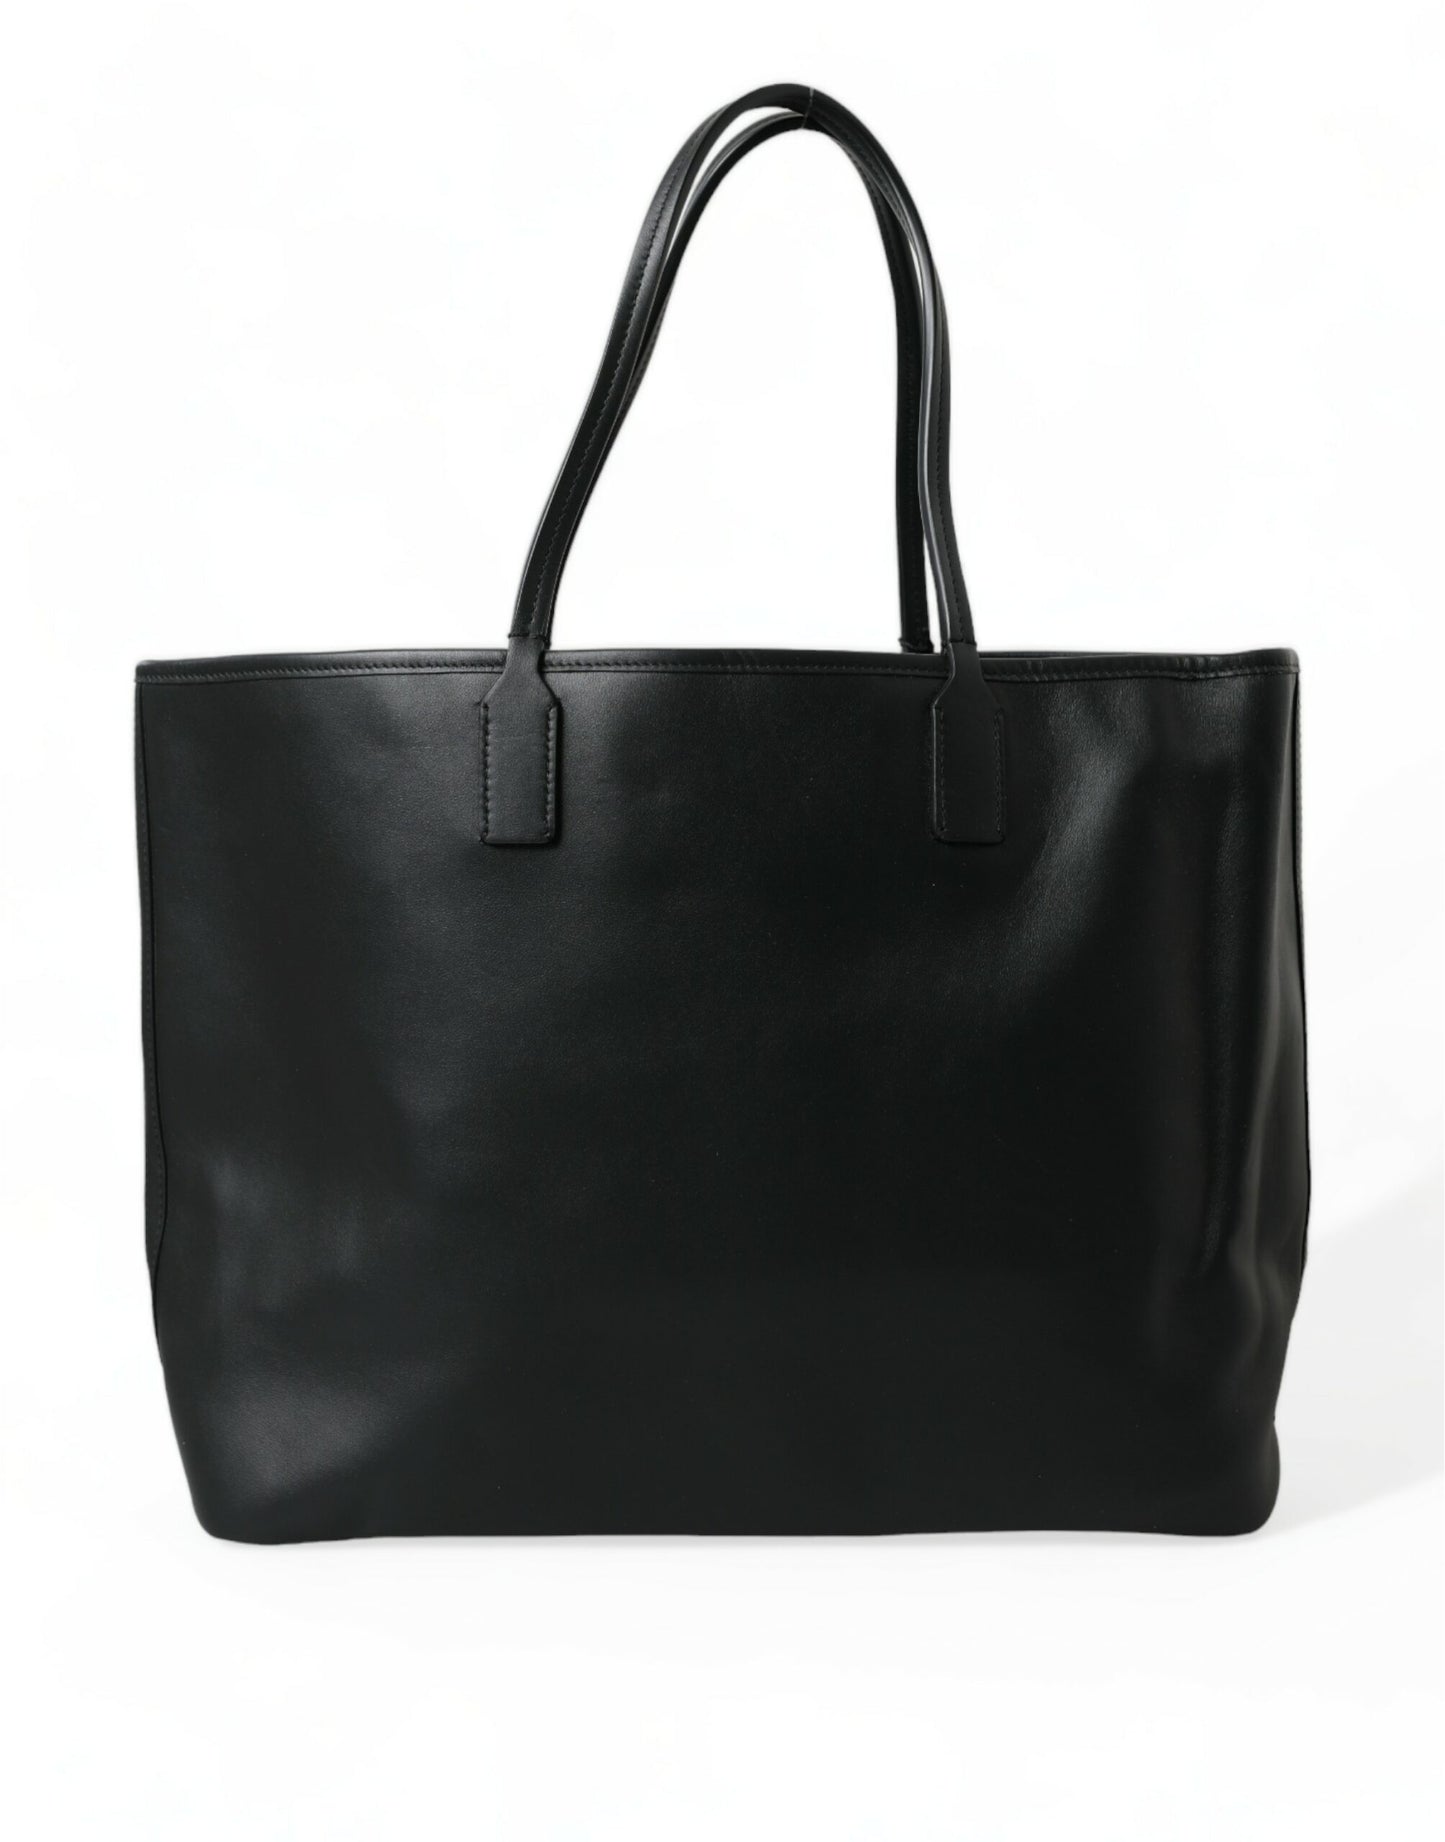 Elegant Black Leather Tote with Gold Detailing